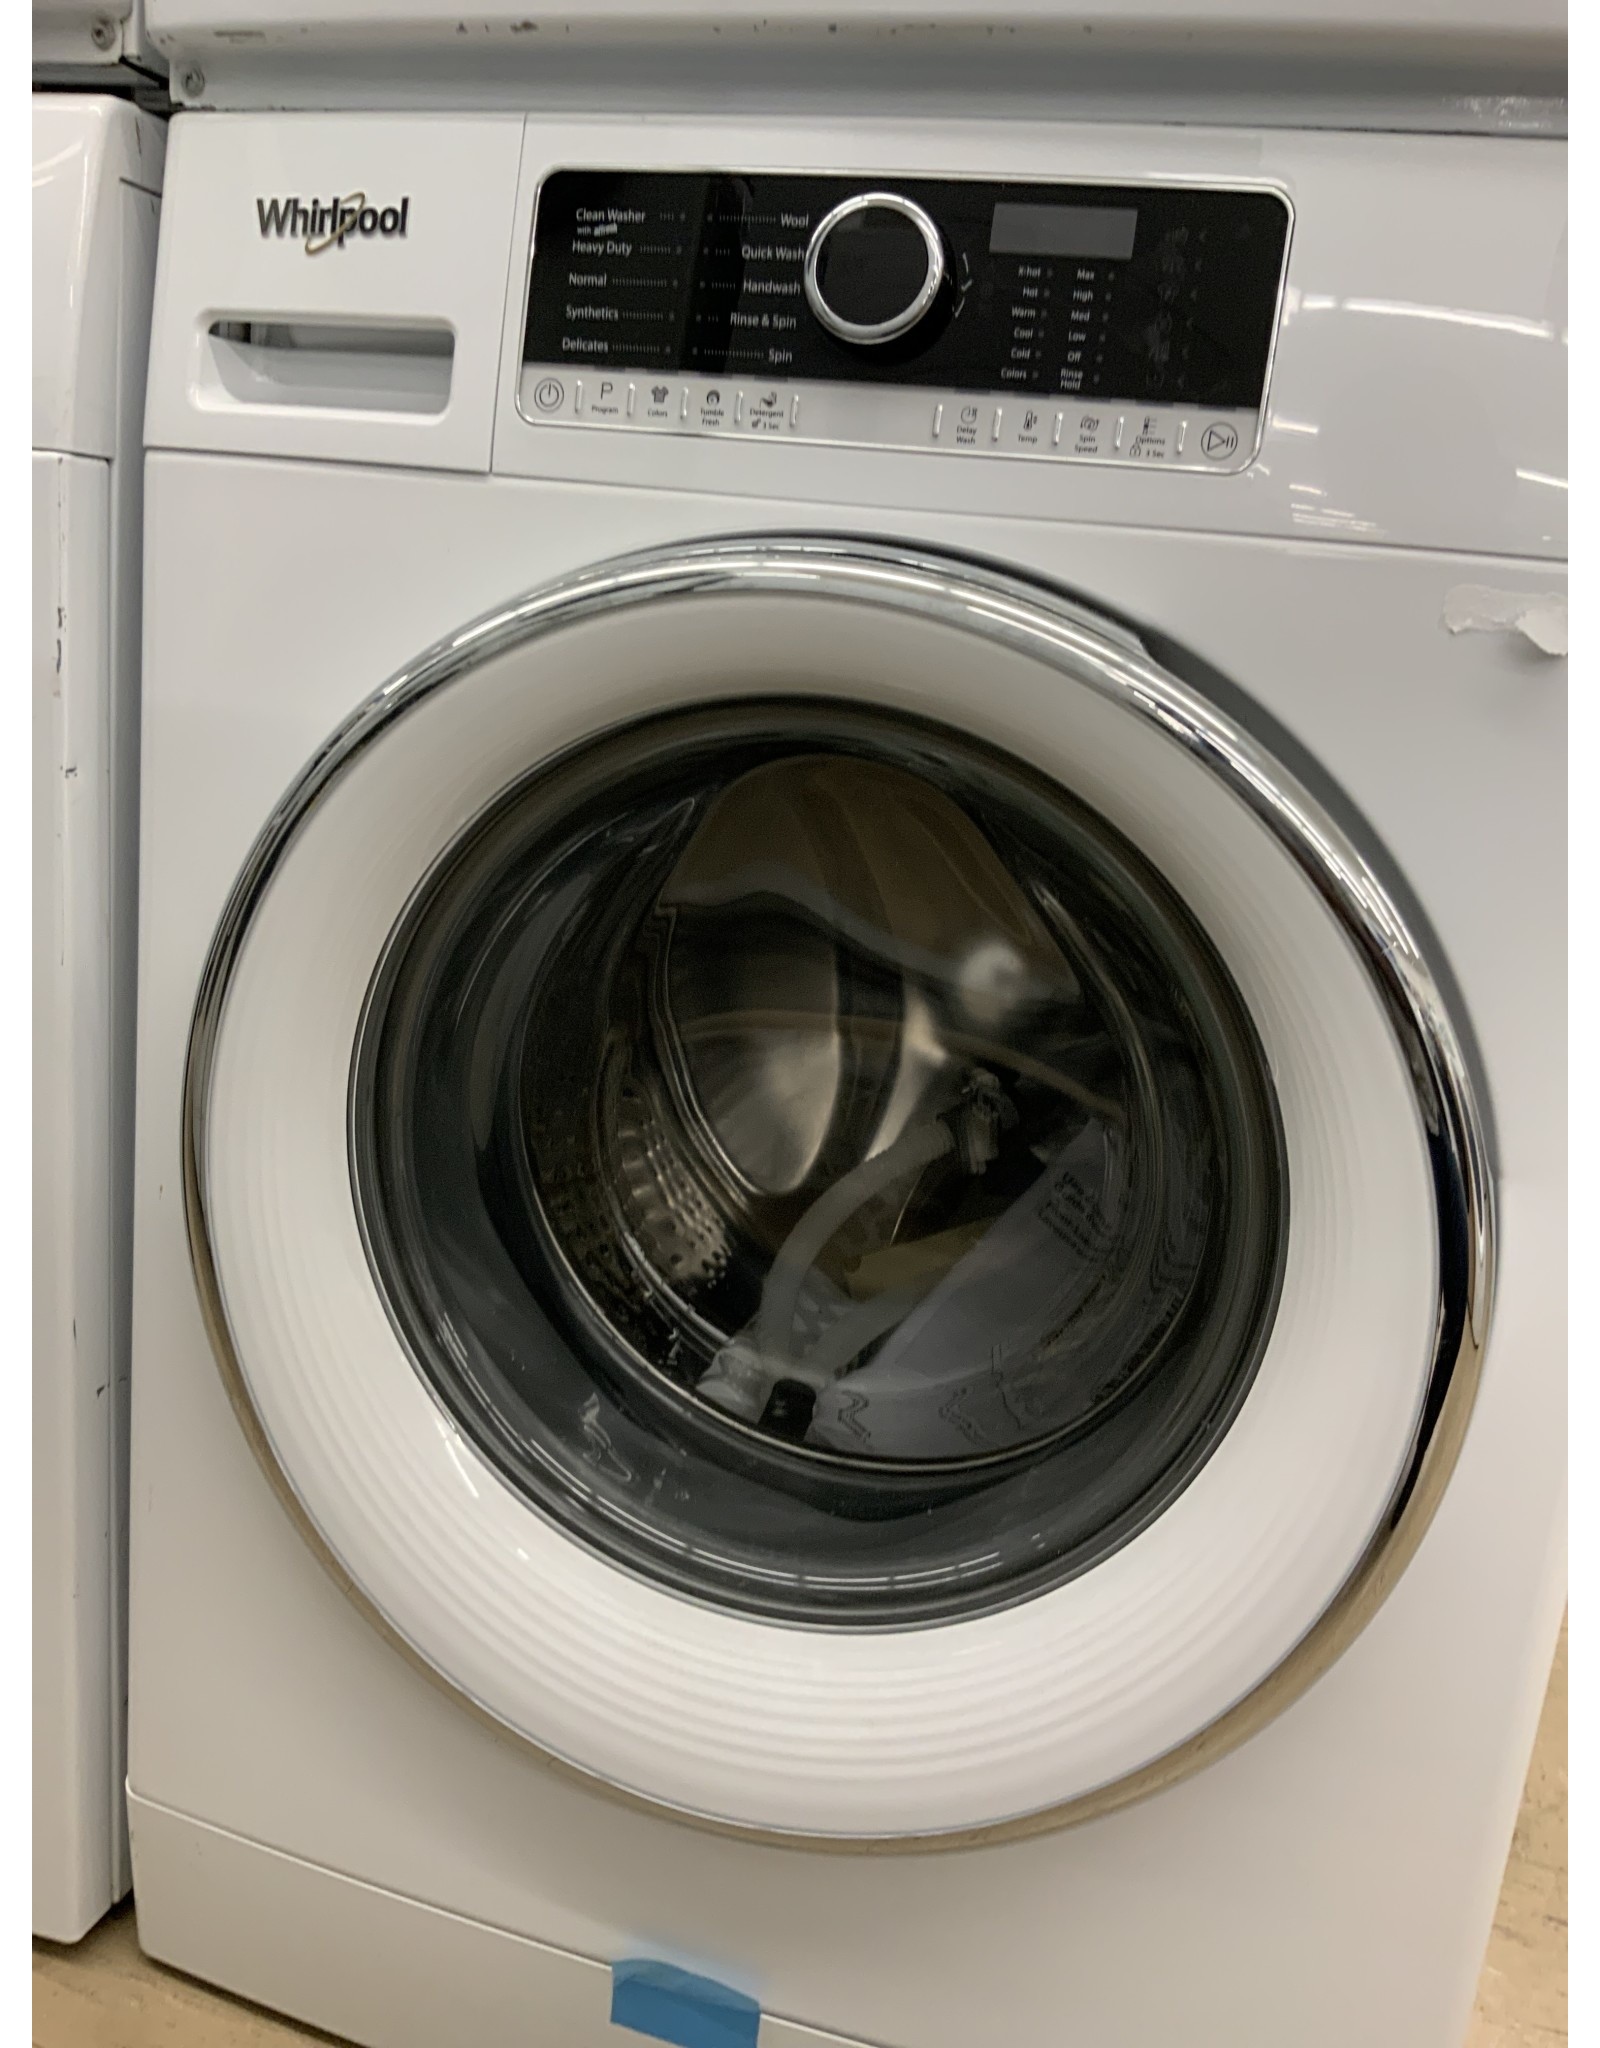 WHIRLPOOL WFW5090JW 2.3 cu. ft. High Efficiency White Front Load Compact Washing Machine, ENERGY STAR